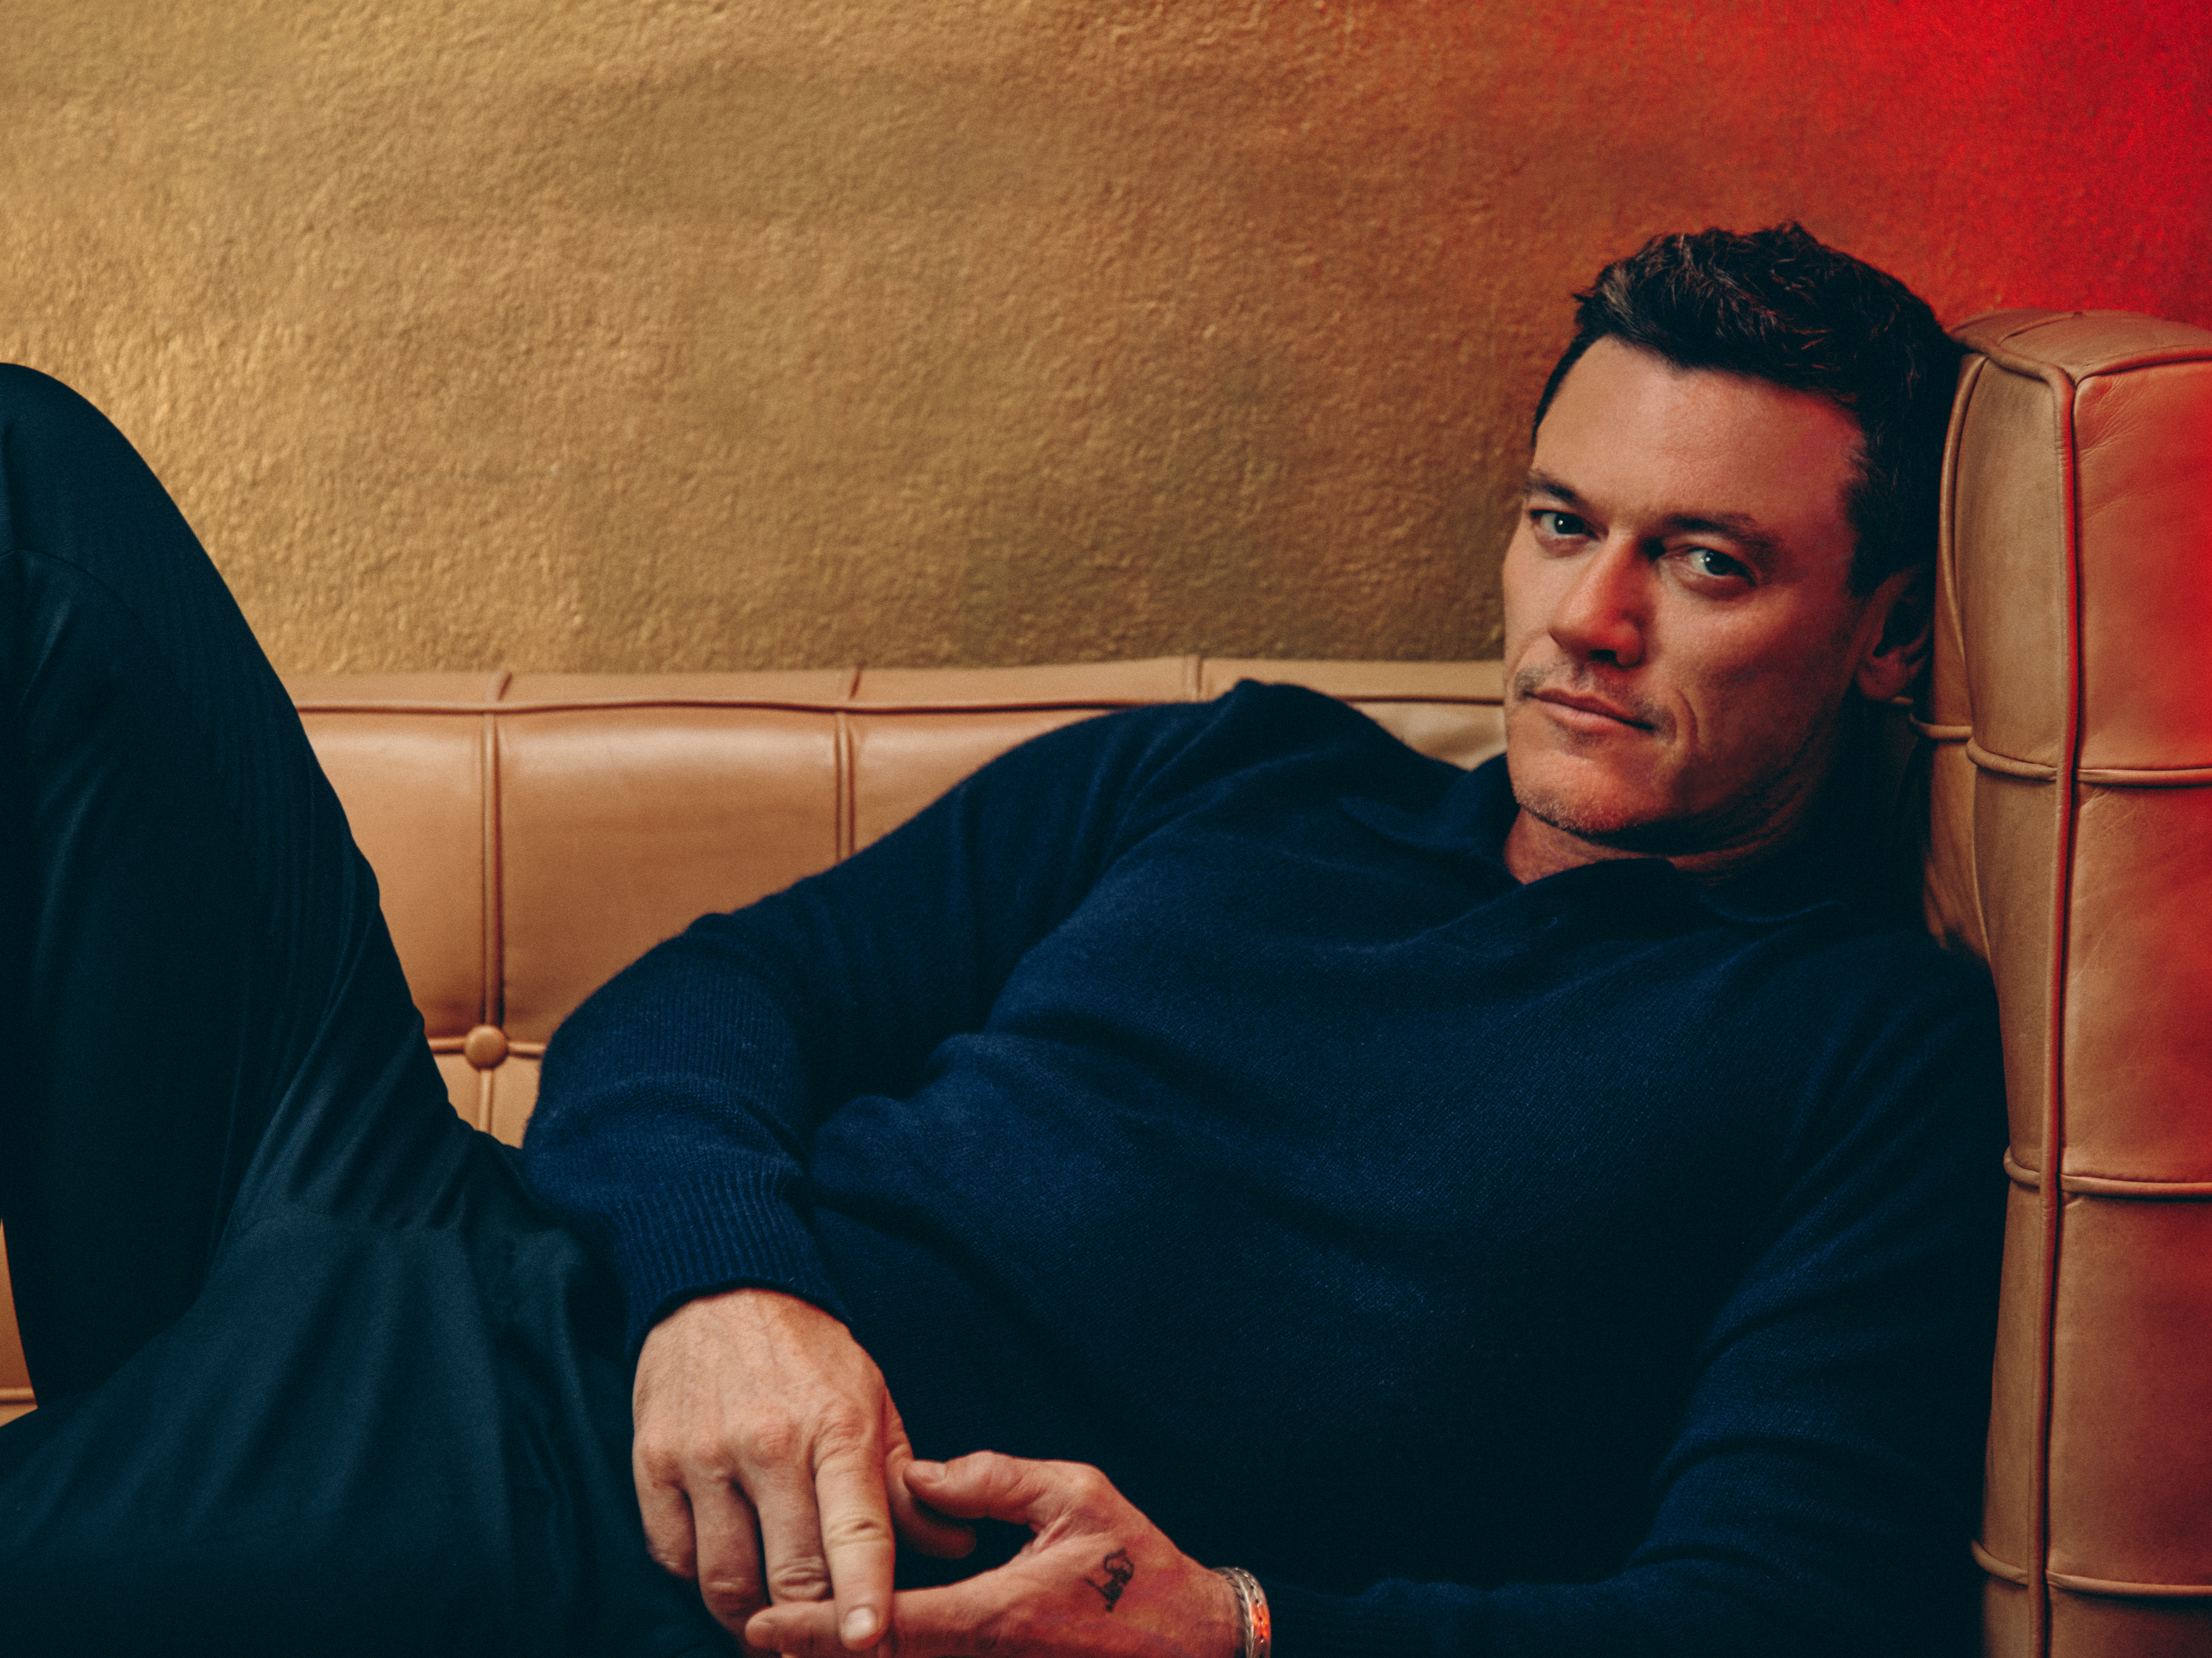 Luke Evans interview: ‘When I sing, there’s no mask to put on. It’s quite a raw, vulnerable place to be’